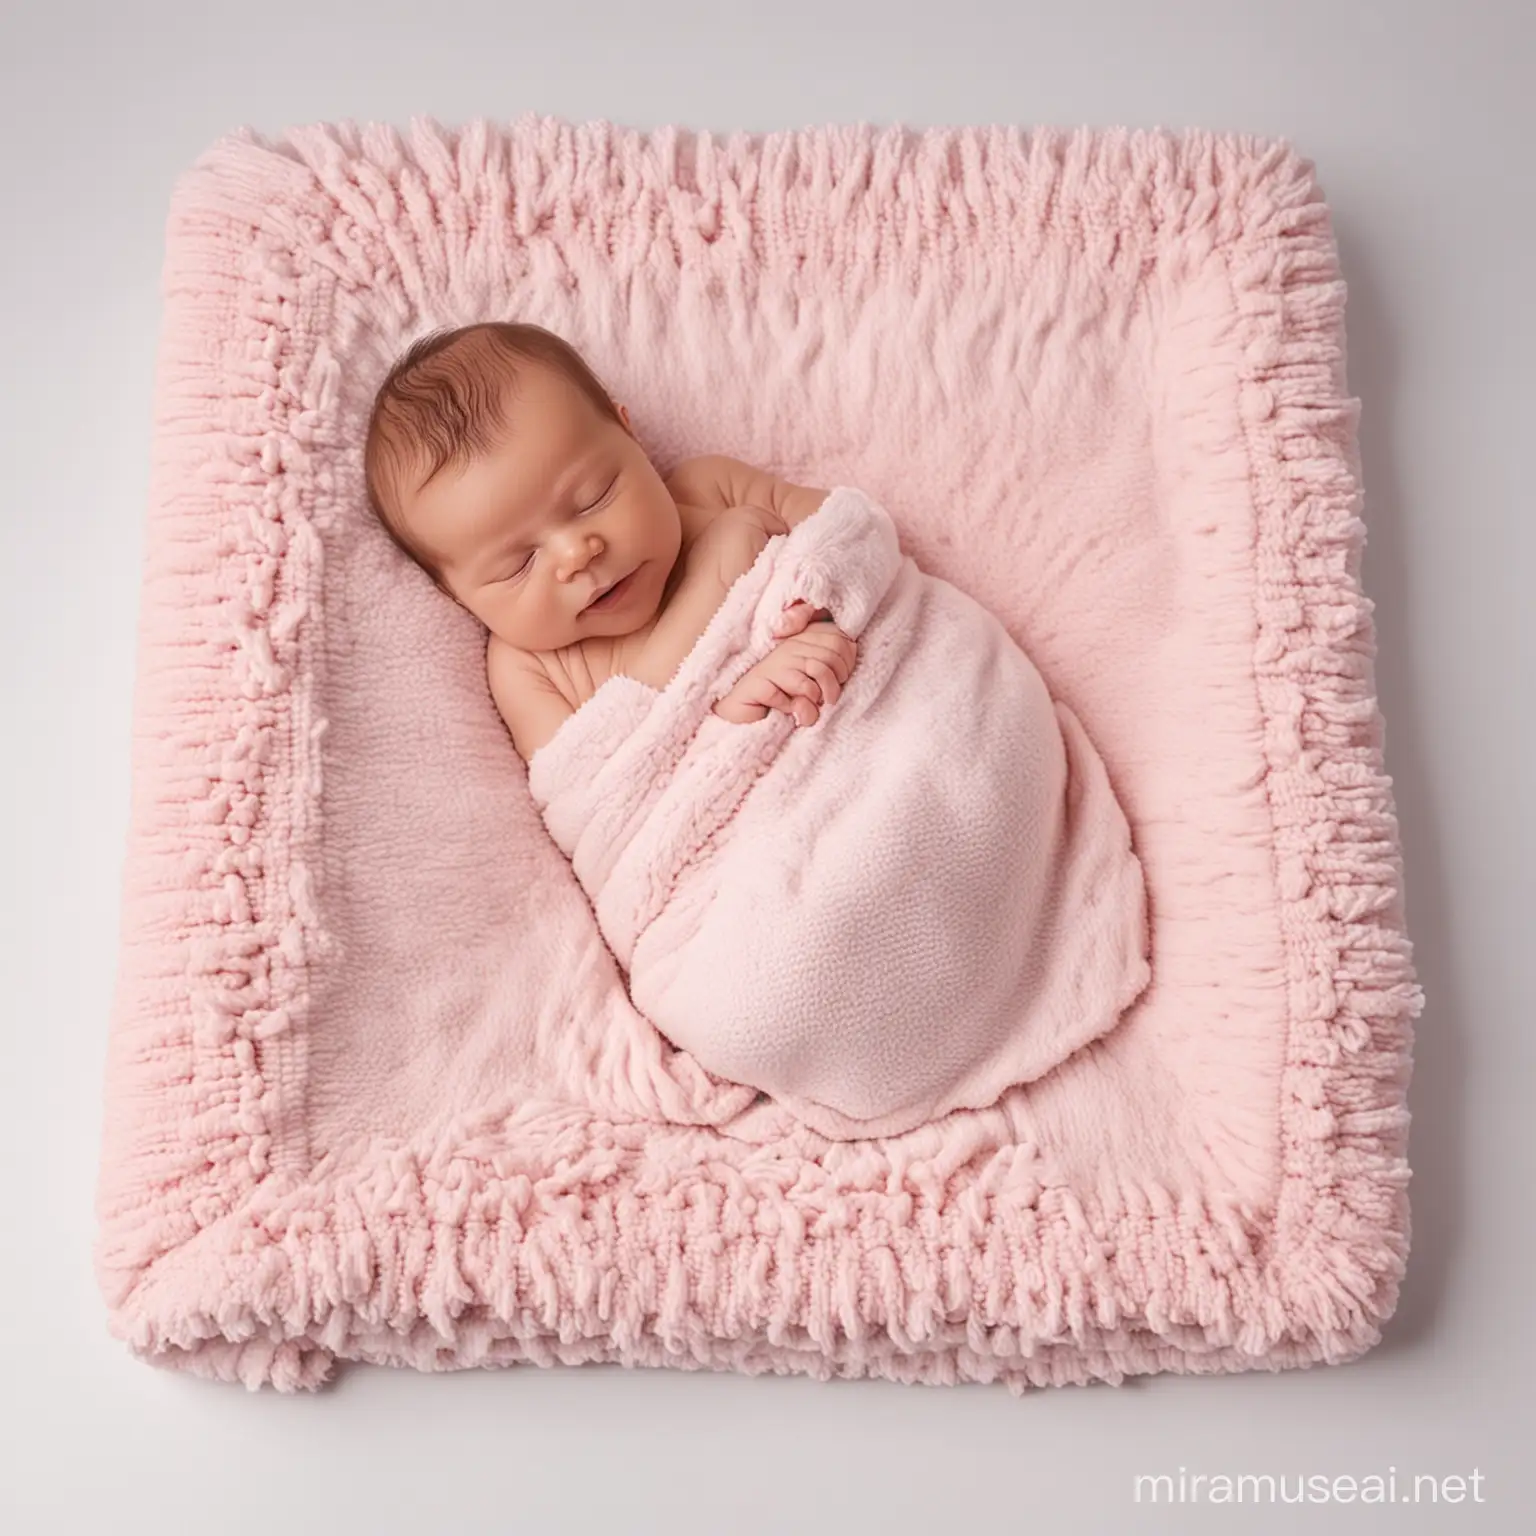 Newborn Comfort Side View of a Cozy Blanket and Bed